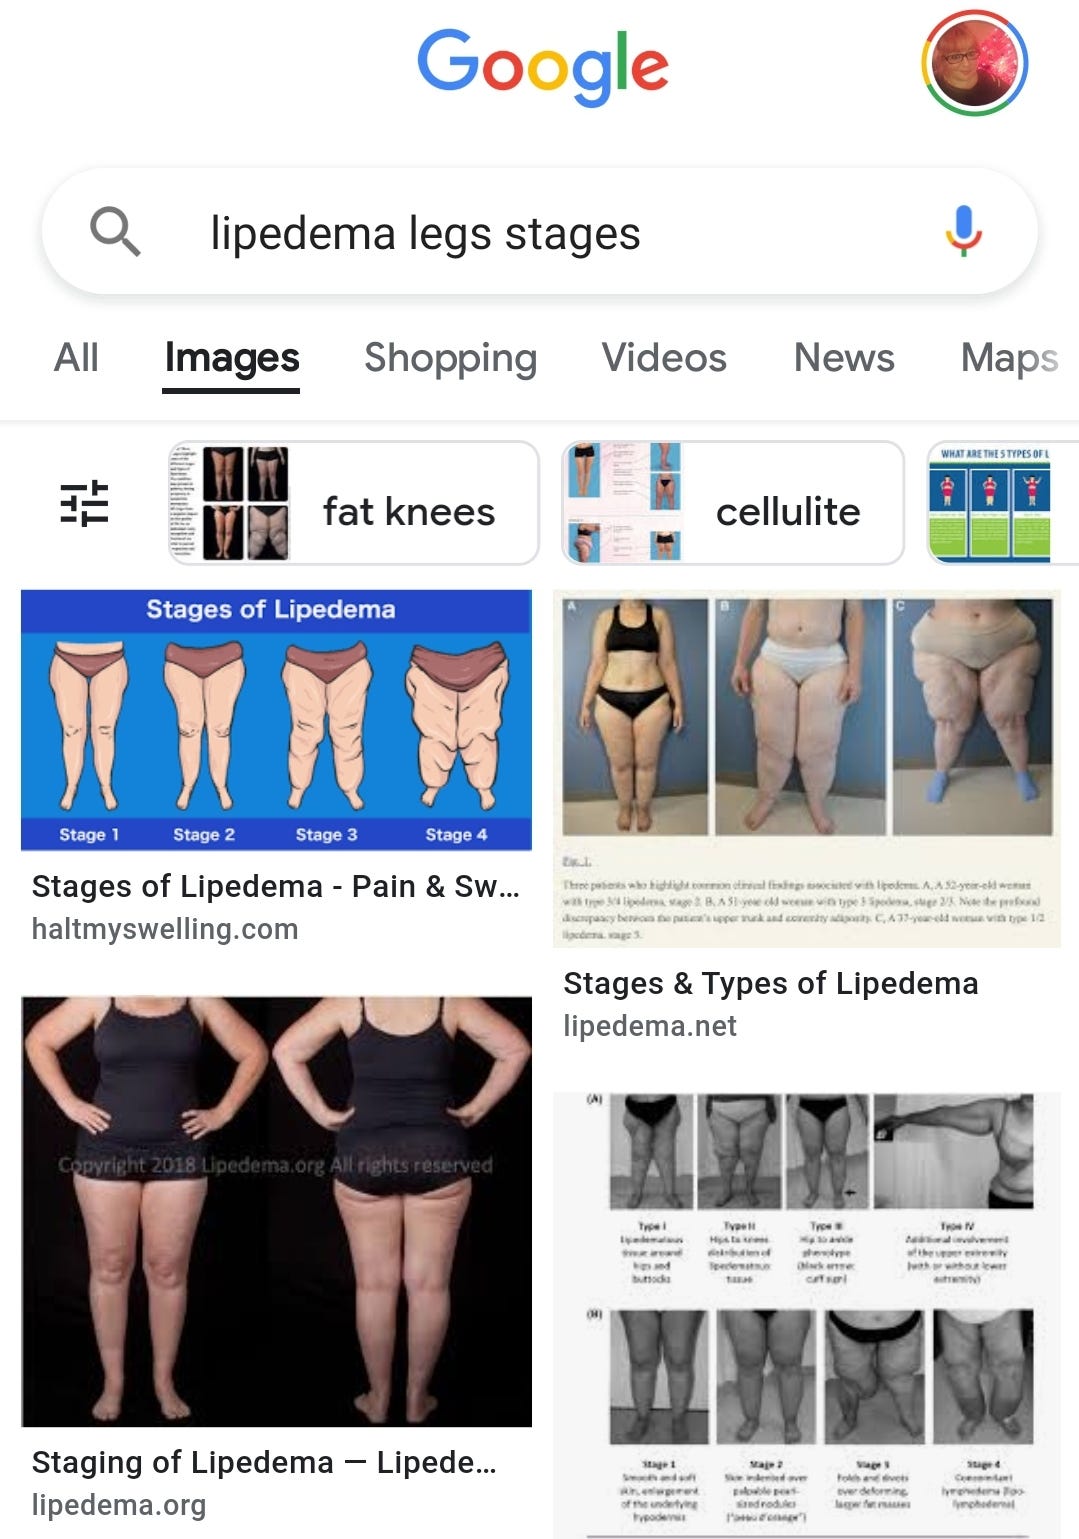 Women with lipedema have major health problems but wait decades